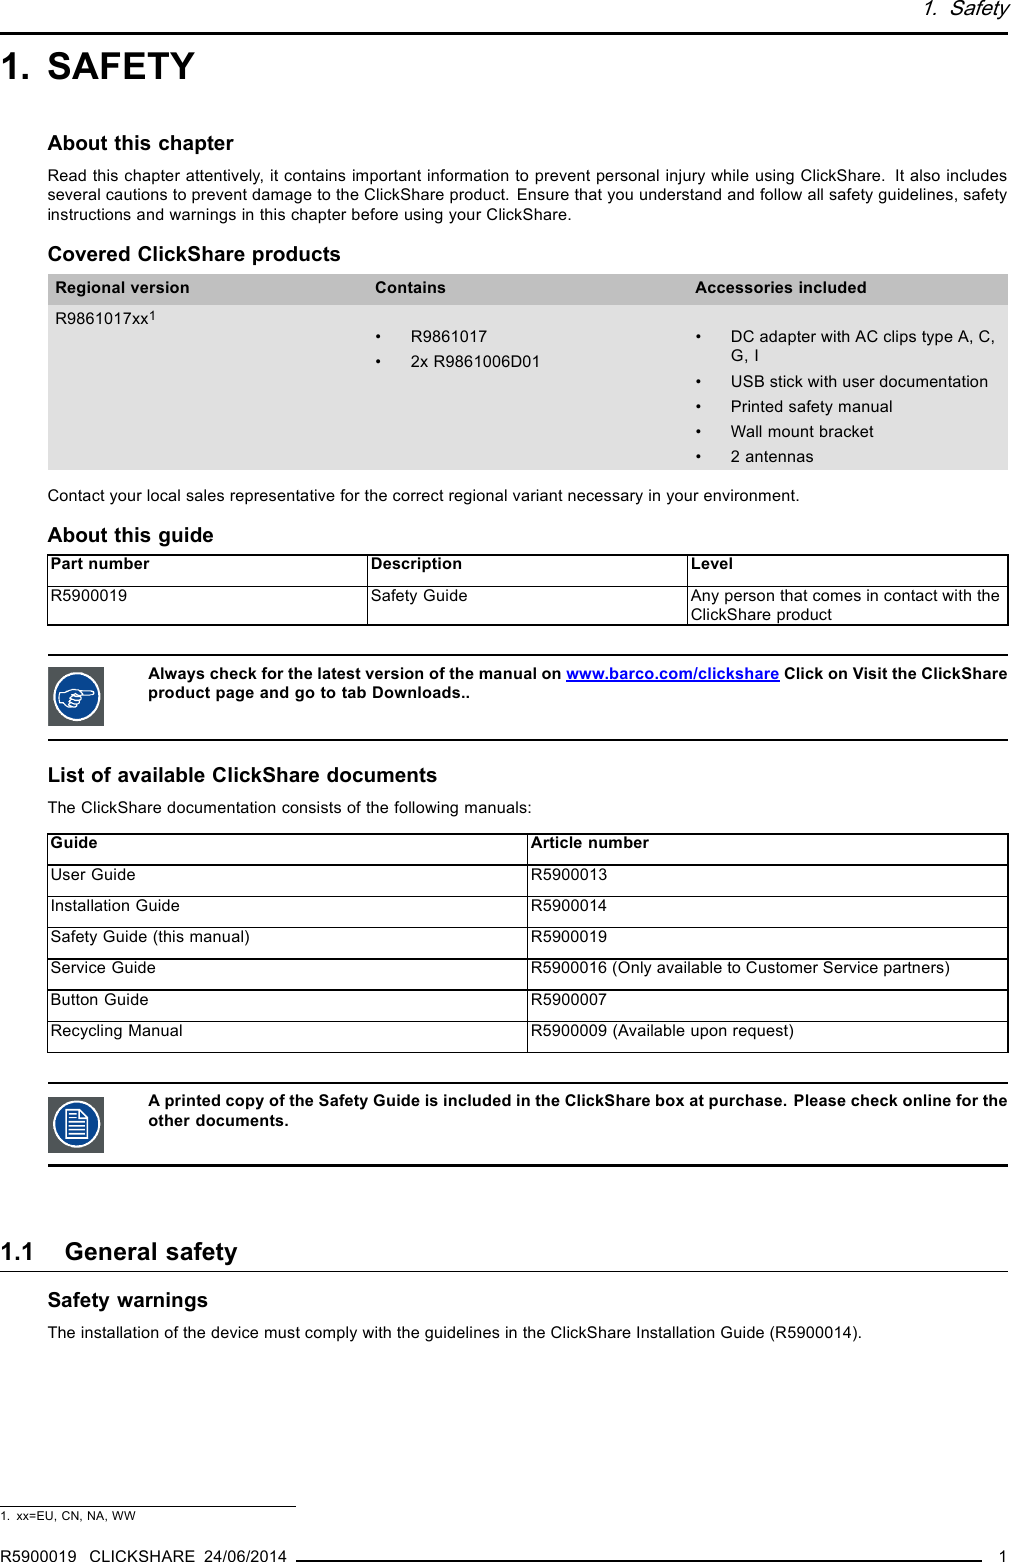 1. Safety1. SAFETYAbout this chapterRead this chapter attentively, it contains important information to prevent personal injury while using ClickShare. It also includesseveral cautions to prevent damage to the ClickShare product. Ensure that you understand and follow all safety guidelines, safetyinstructions and warnings in this chapter before using your ClickShare.Covered ClickShare productsRegional version Contains Accessories includedR9861017xx1• R9861017• 2x R9861006D01• DC adapter with AC clips type A, C,G, I• USB stick with user documentation• Printed safety manual• Wall mount bracket• 2 antennasContact your local sales representative for the correct regional variant necessary in your environment.About this guidePart number Description LevelR5900019 Safety Guide Any person that comes in contact with theClickShare productAlways check for the latest version of the manual on www.barco.com/clickshare Click on Visit the ClickShareproduct page and go to tab Downloads..List of available ClickShare documentsThe ClickShare documentation consists of the following manuals:Guide Article numberUser Guide R5900013Installation Guide R5900014Safety Guide (this manual) R5900019Service Guide R5900016 (Only available to Customer Service partners)Button Guide R5900007Recycling Manual R5900009 (Available upon request)A printed copy of the Safety Guide is included in the ClickShare box at purchase. Please check online for theother documents.1.1 General safetySafety warningsThe installation of the device must comply with the guidelines in the ClickShare Installation Guide (R5900014).1. xx=EU, CN, NA, WWR5900019 CLICKSHARE 24/06/2014 1